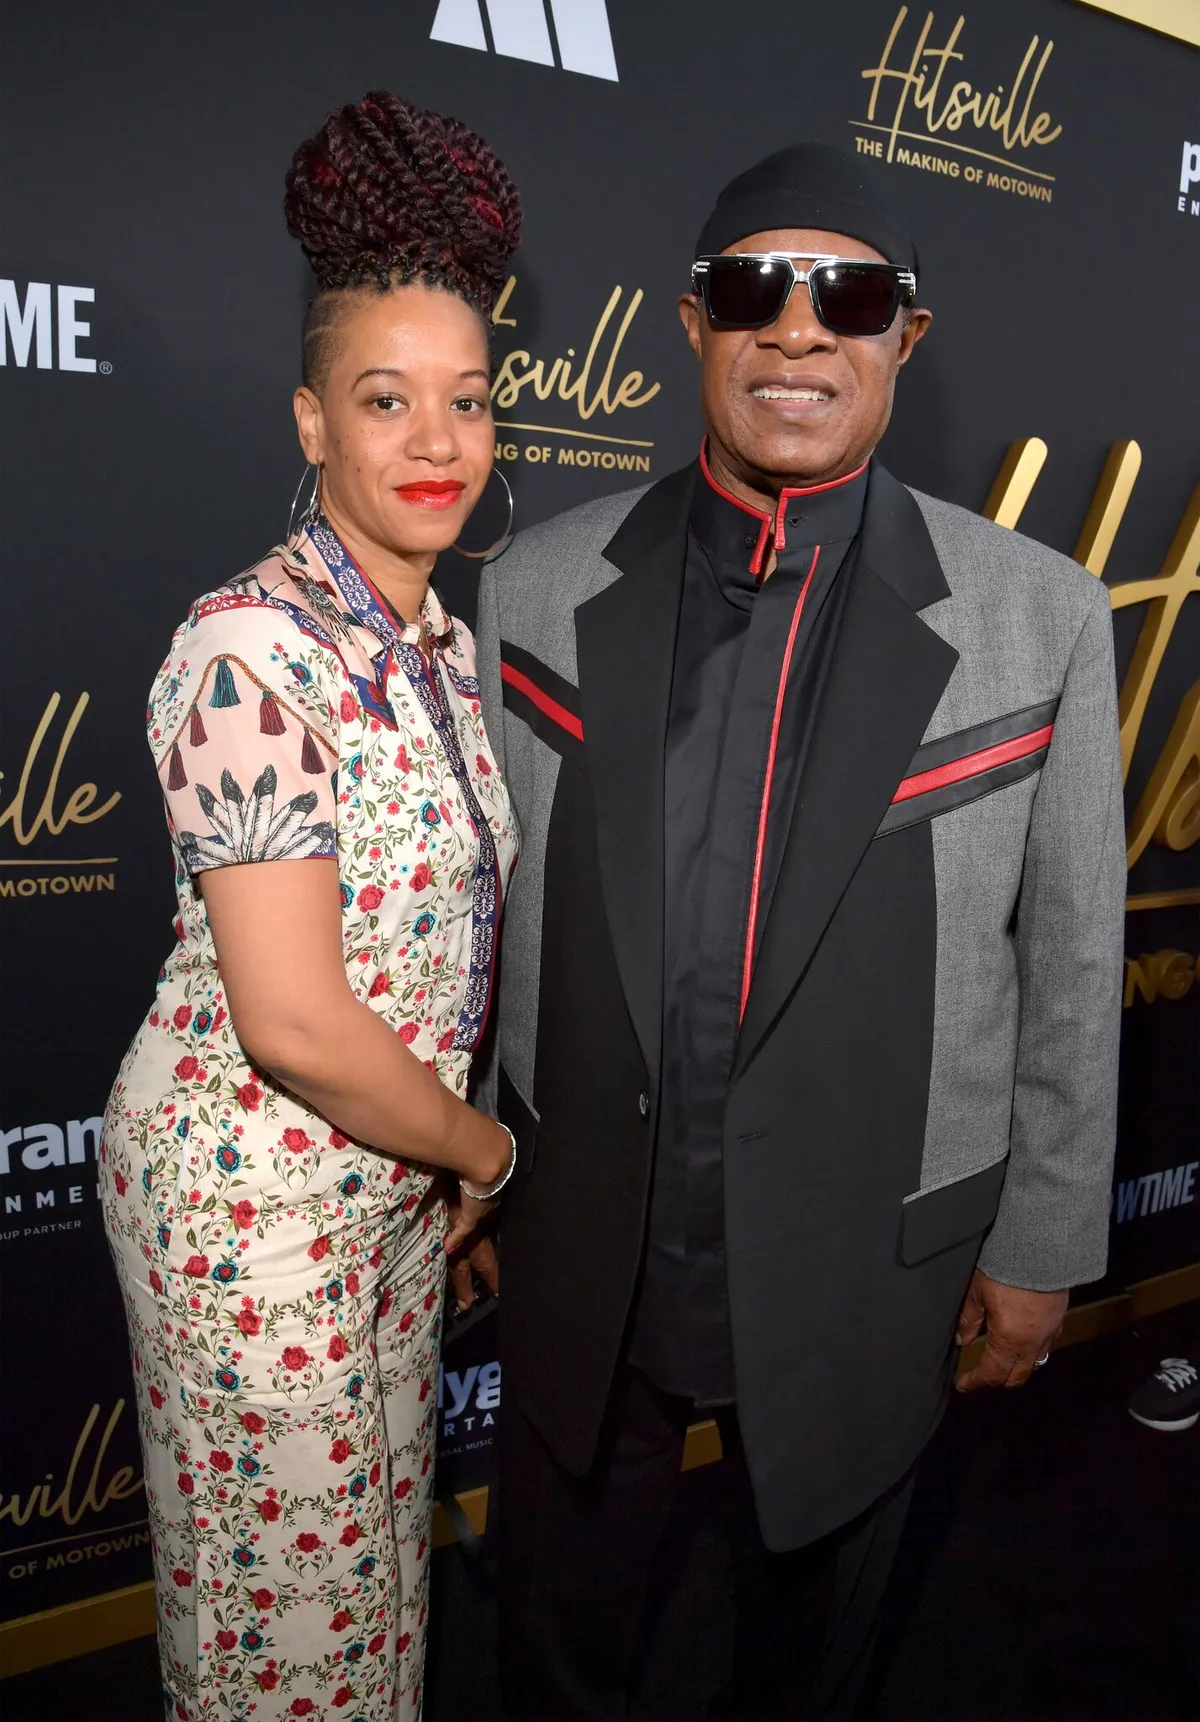 Tomeeka Robyn Bracy and Stevie Wonder attend the World Premiere and After Party of Showtime's "HITSVILLE: The MAKING OF MOTOWN" at Harmony Gold Theatre | Getty Images